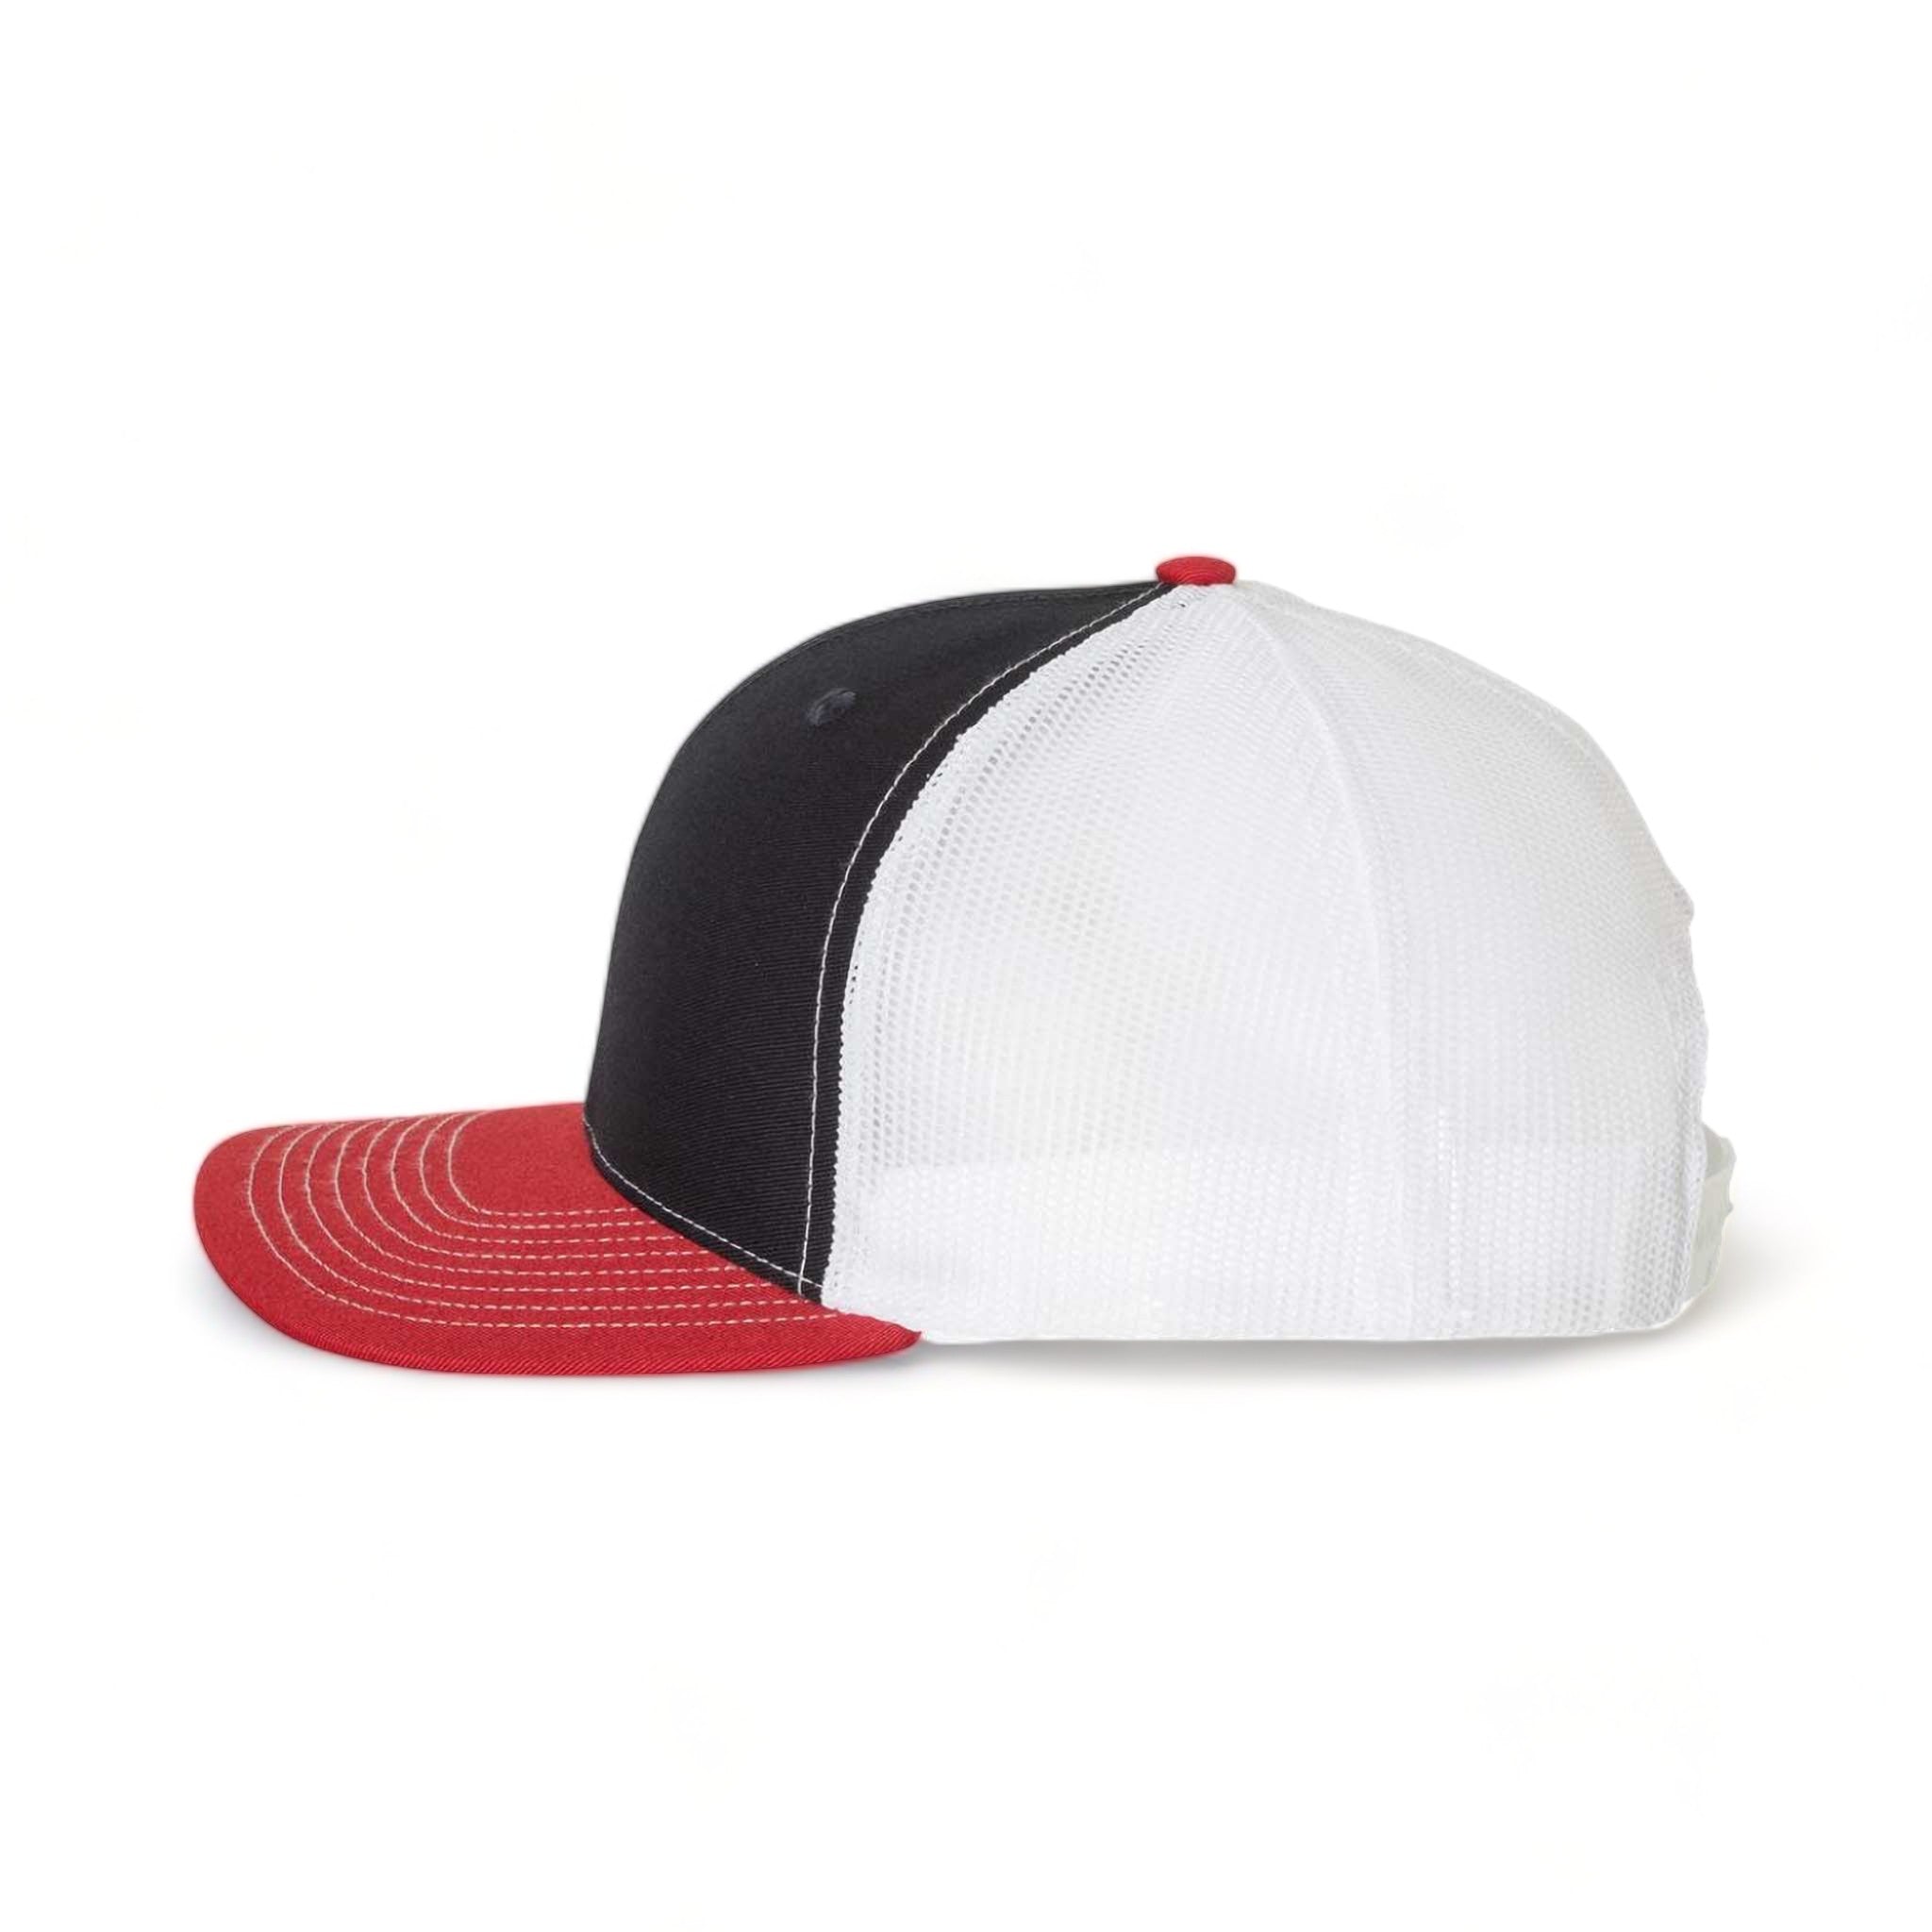 Side view of Richardson 112 custom hat in navy, white and red